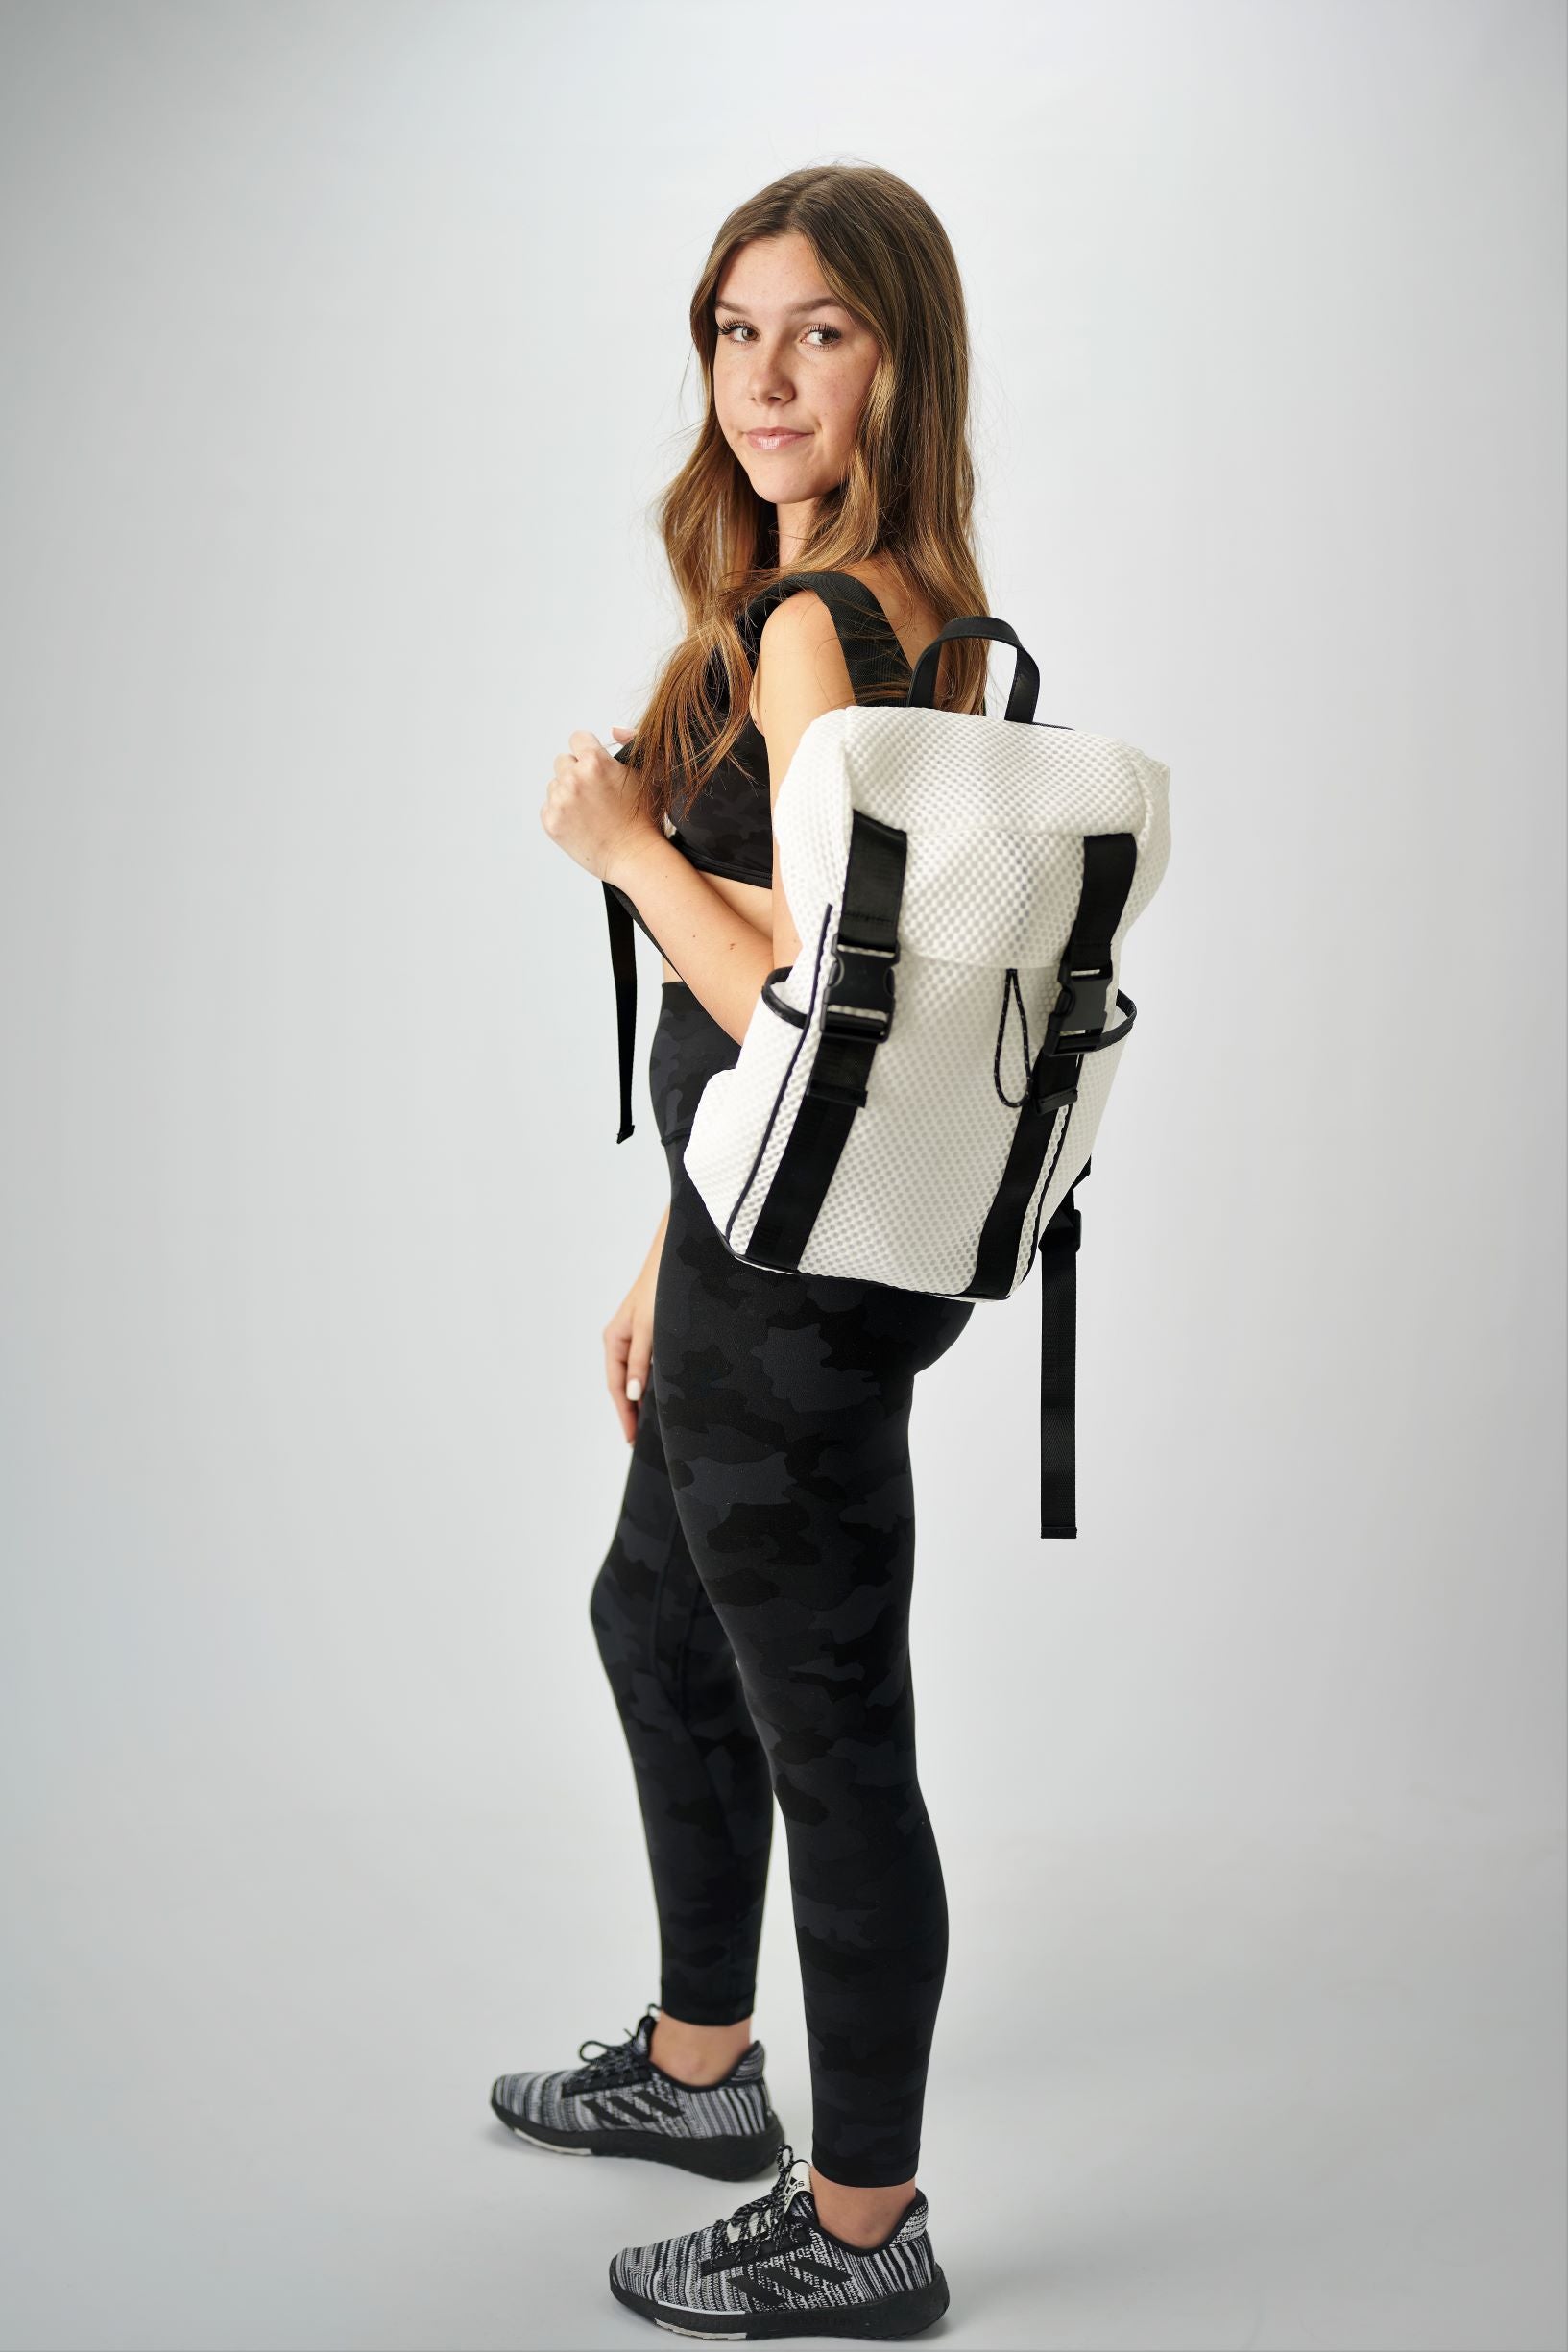 Person holding the Anya & Niki Newberry Backpack - a white mesh backpack with leather details and clear drawstring top.